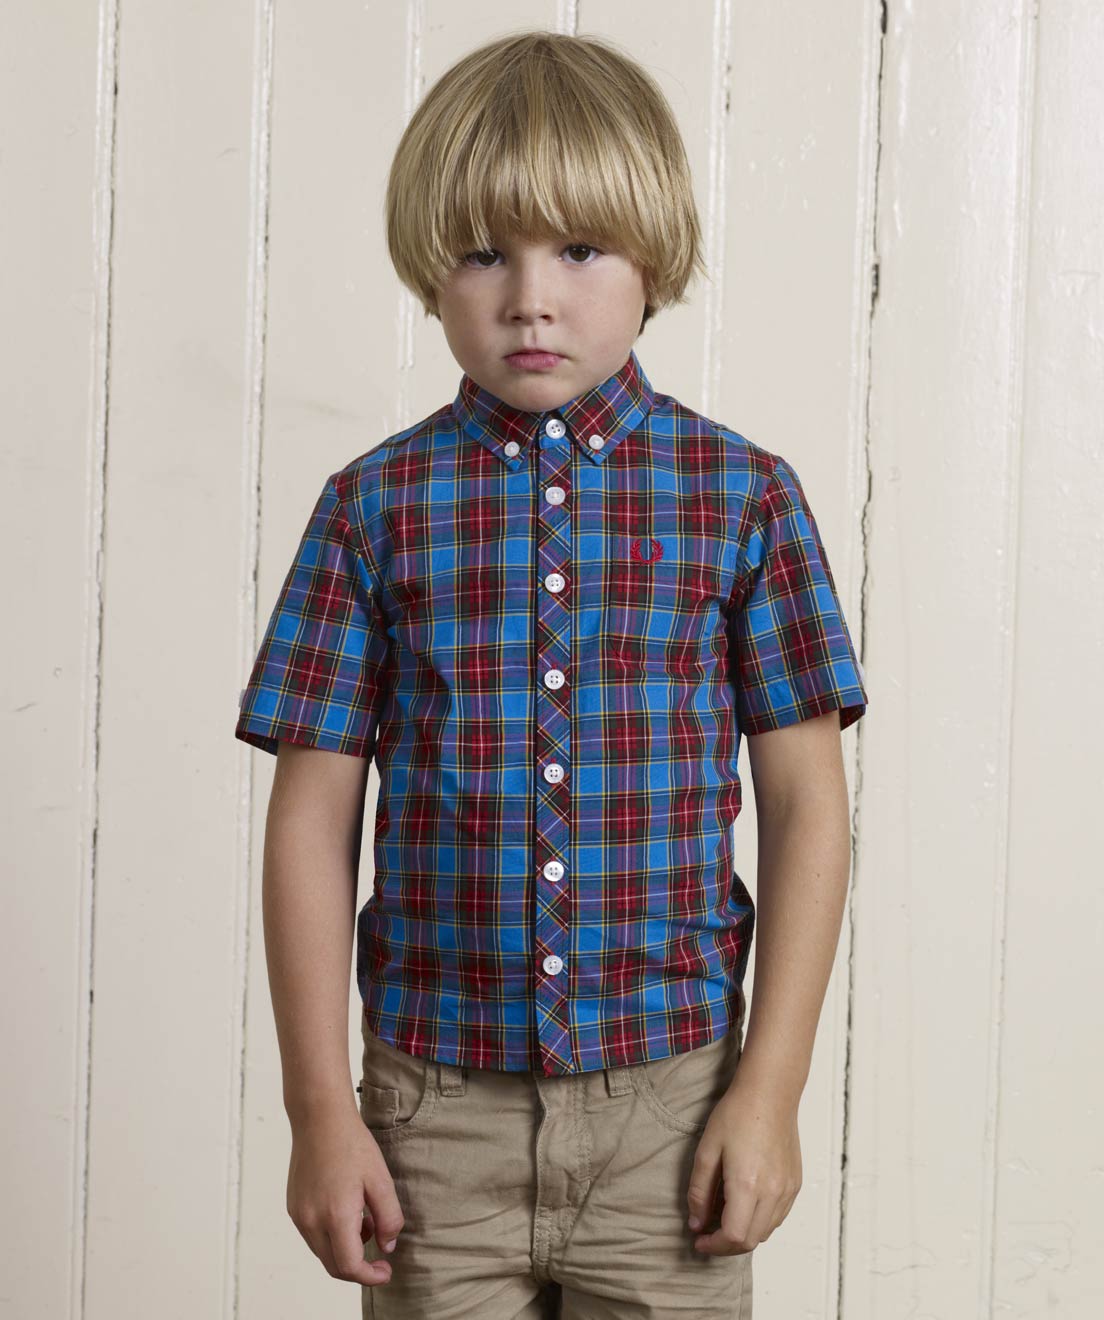 sas&sabs: Finally, Fred Perry for kids has arrived states site!